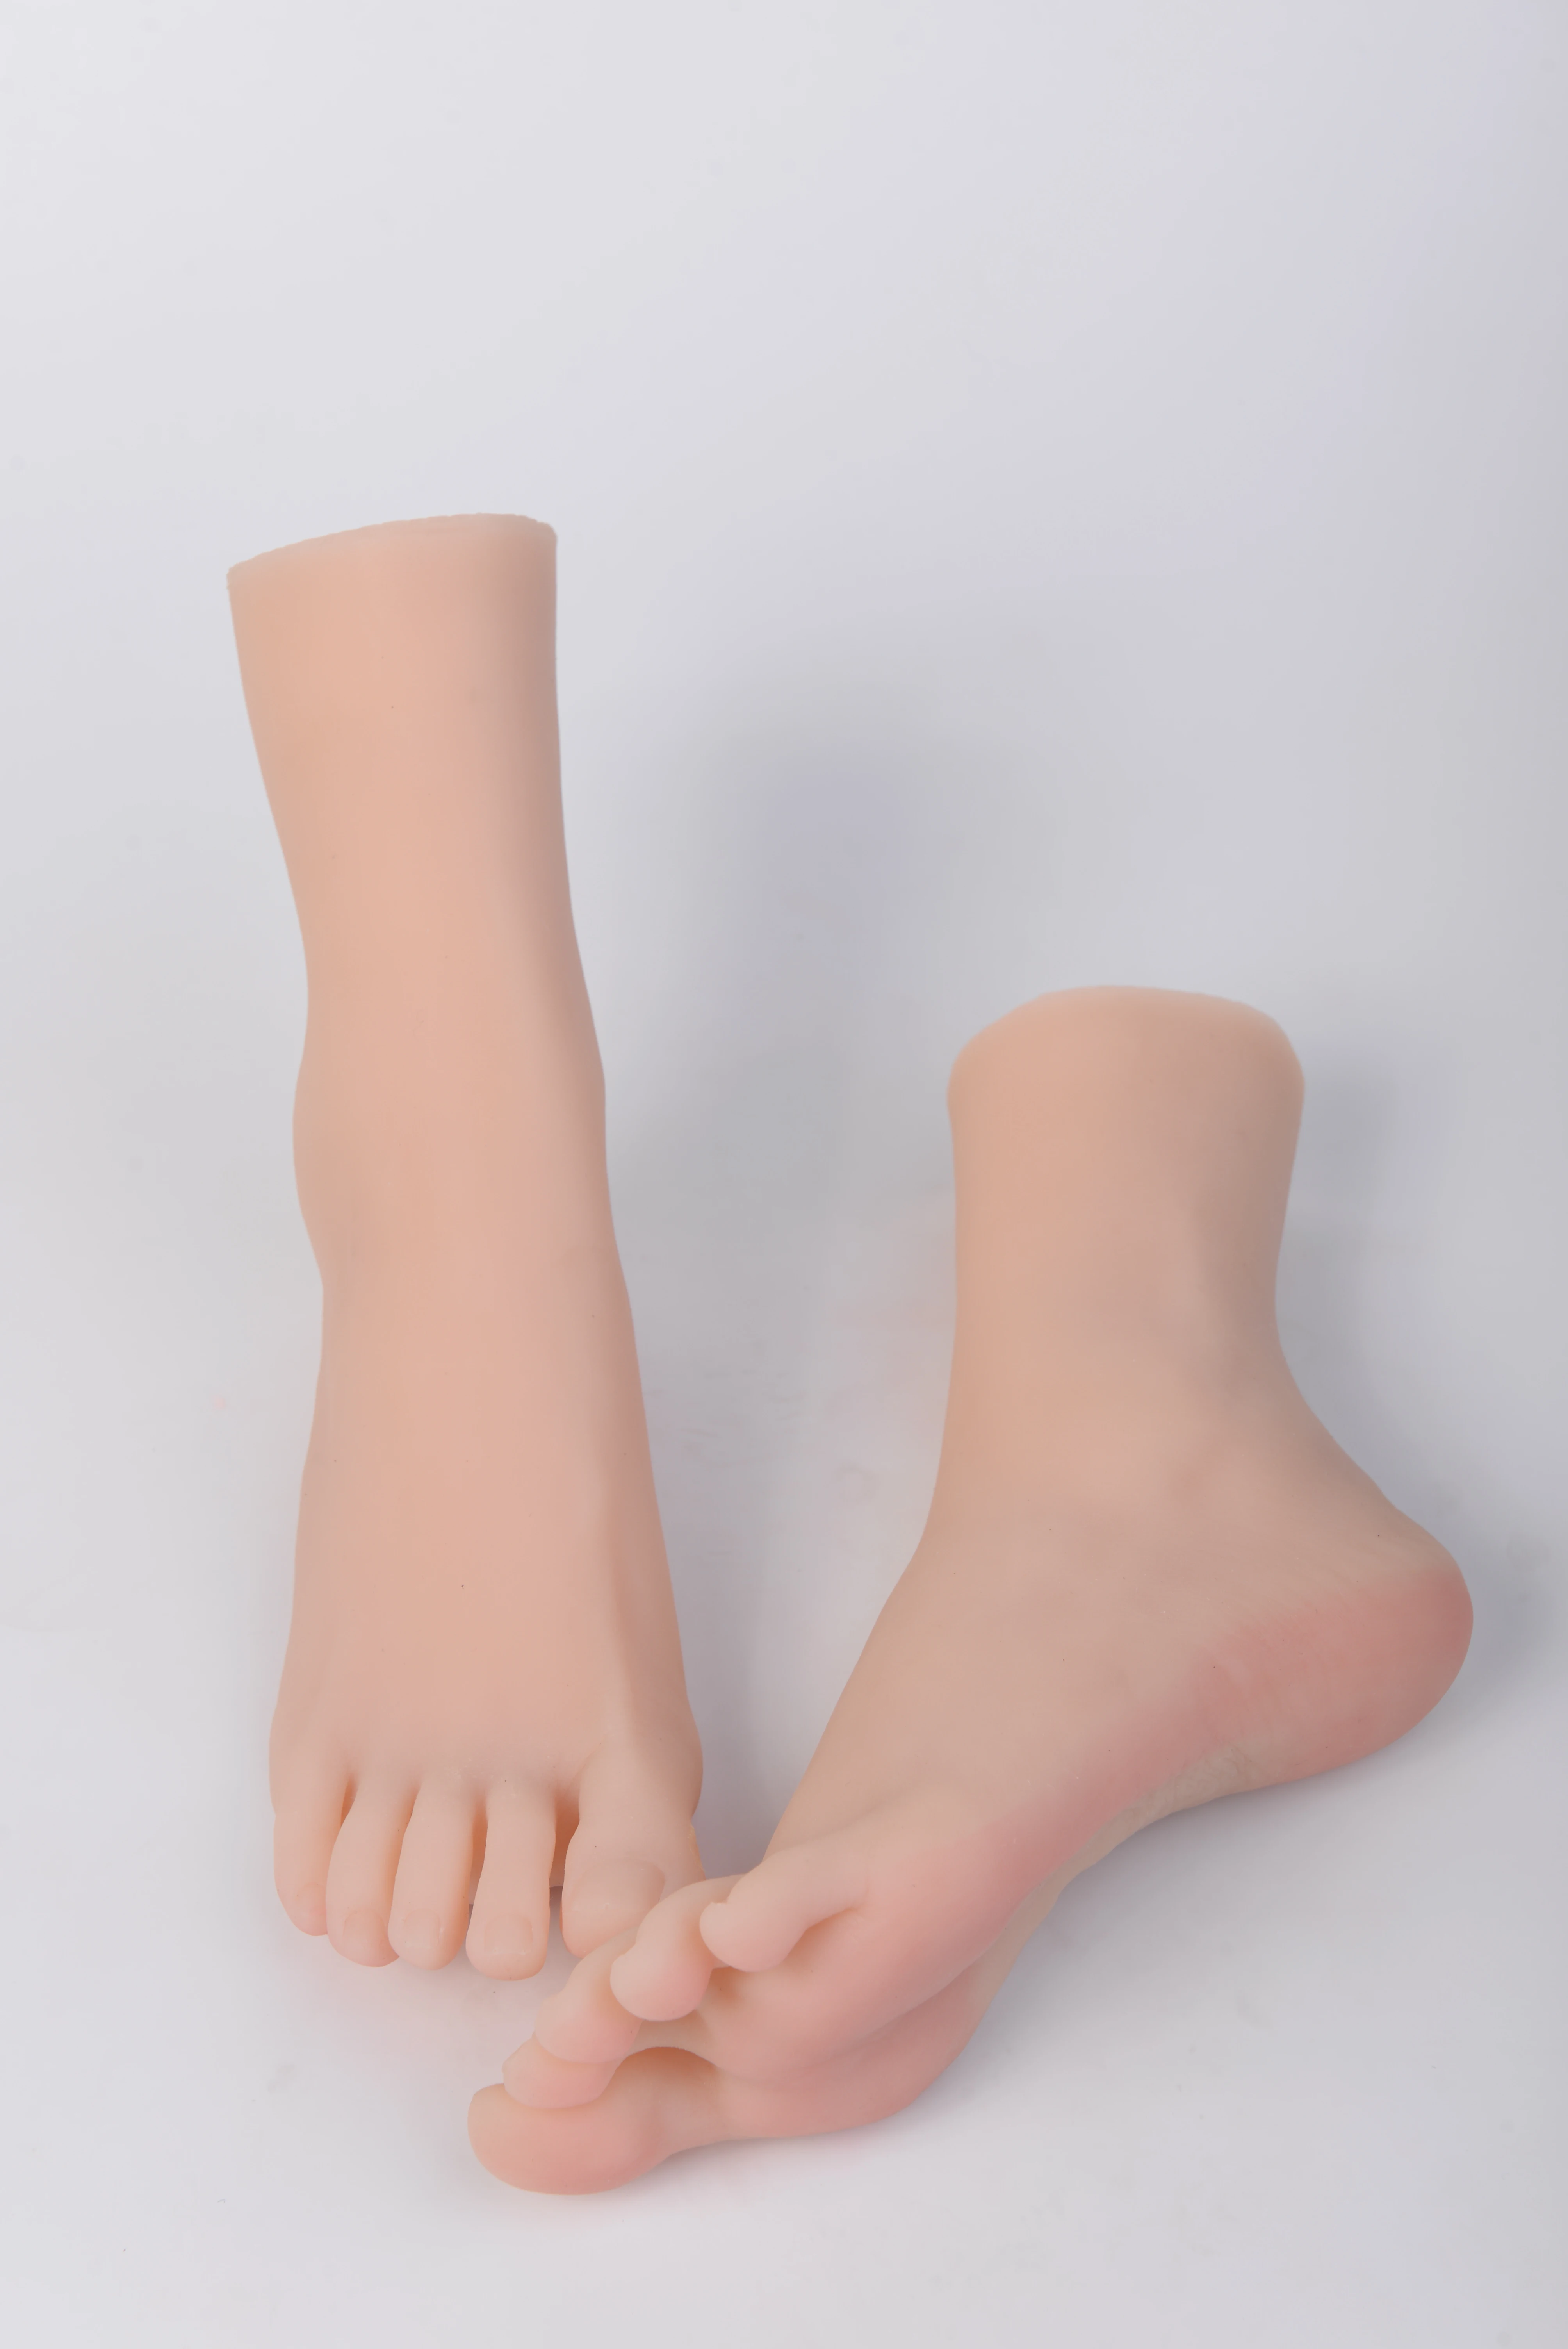 1 Pair lifesize realistic silicone foot mannequin fetish love jewelry display 17 